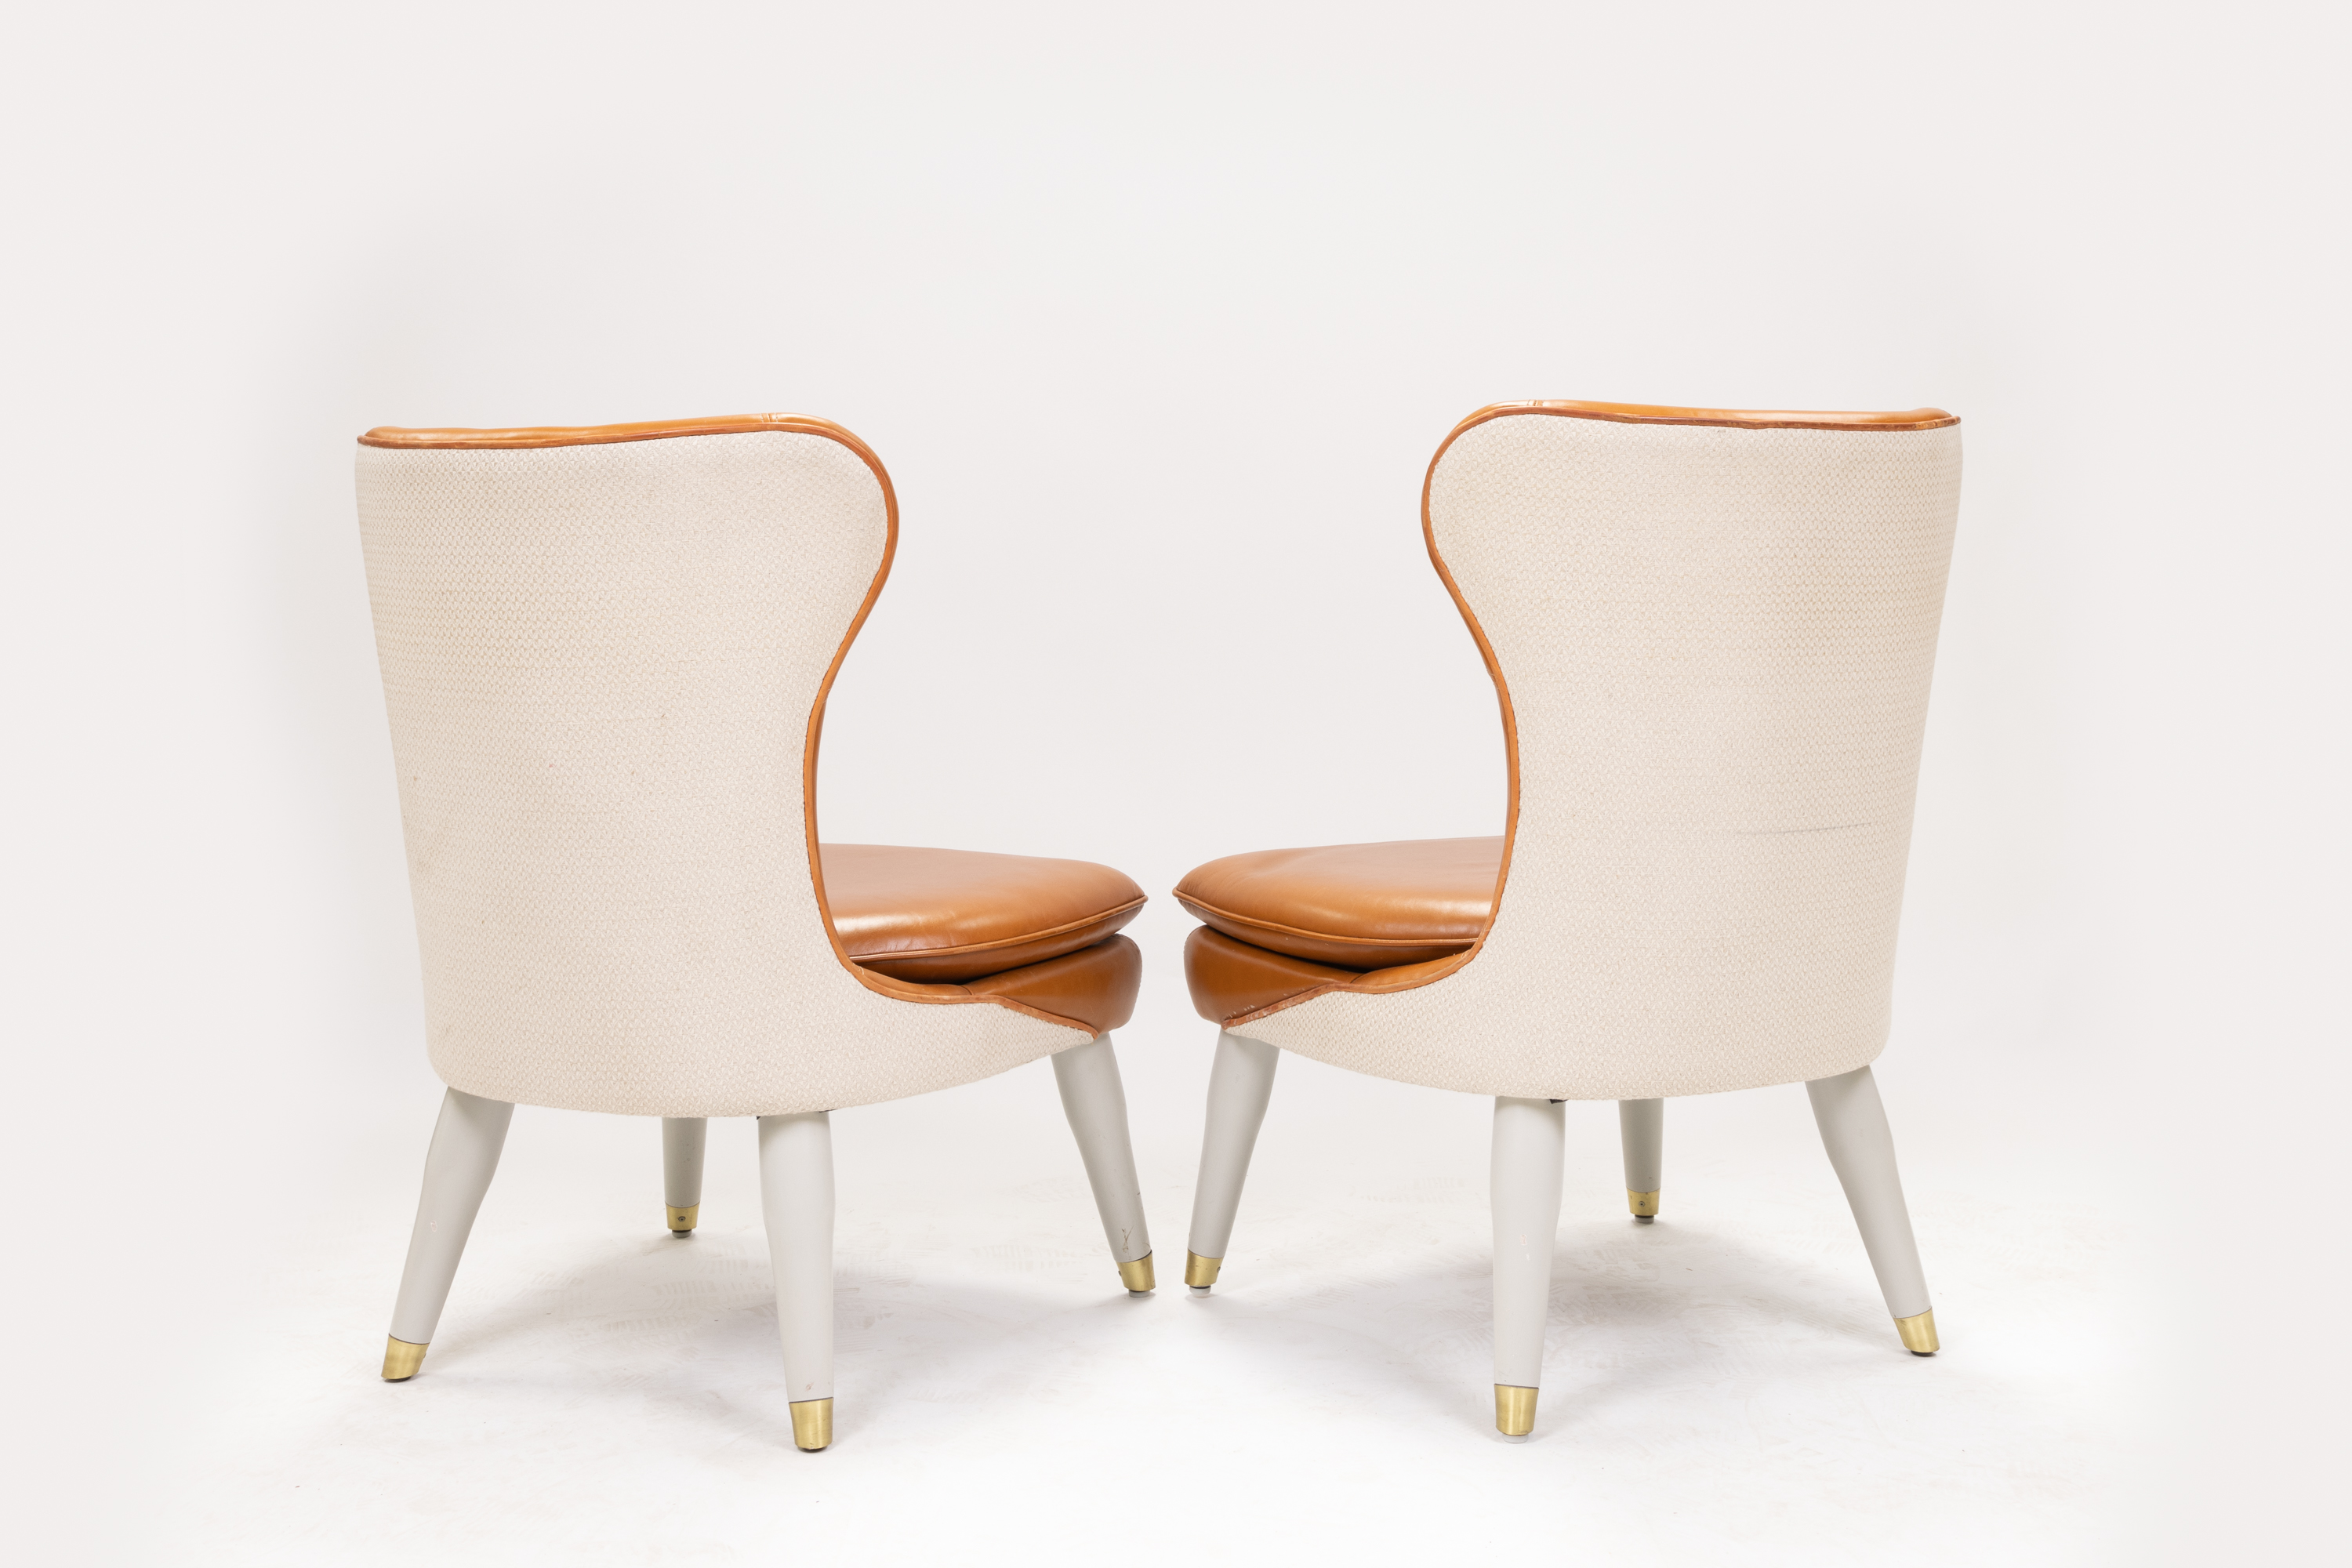 Pair of Ben Whistler Leather Chairs Designed for The Berkeley - Image 5 of 5